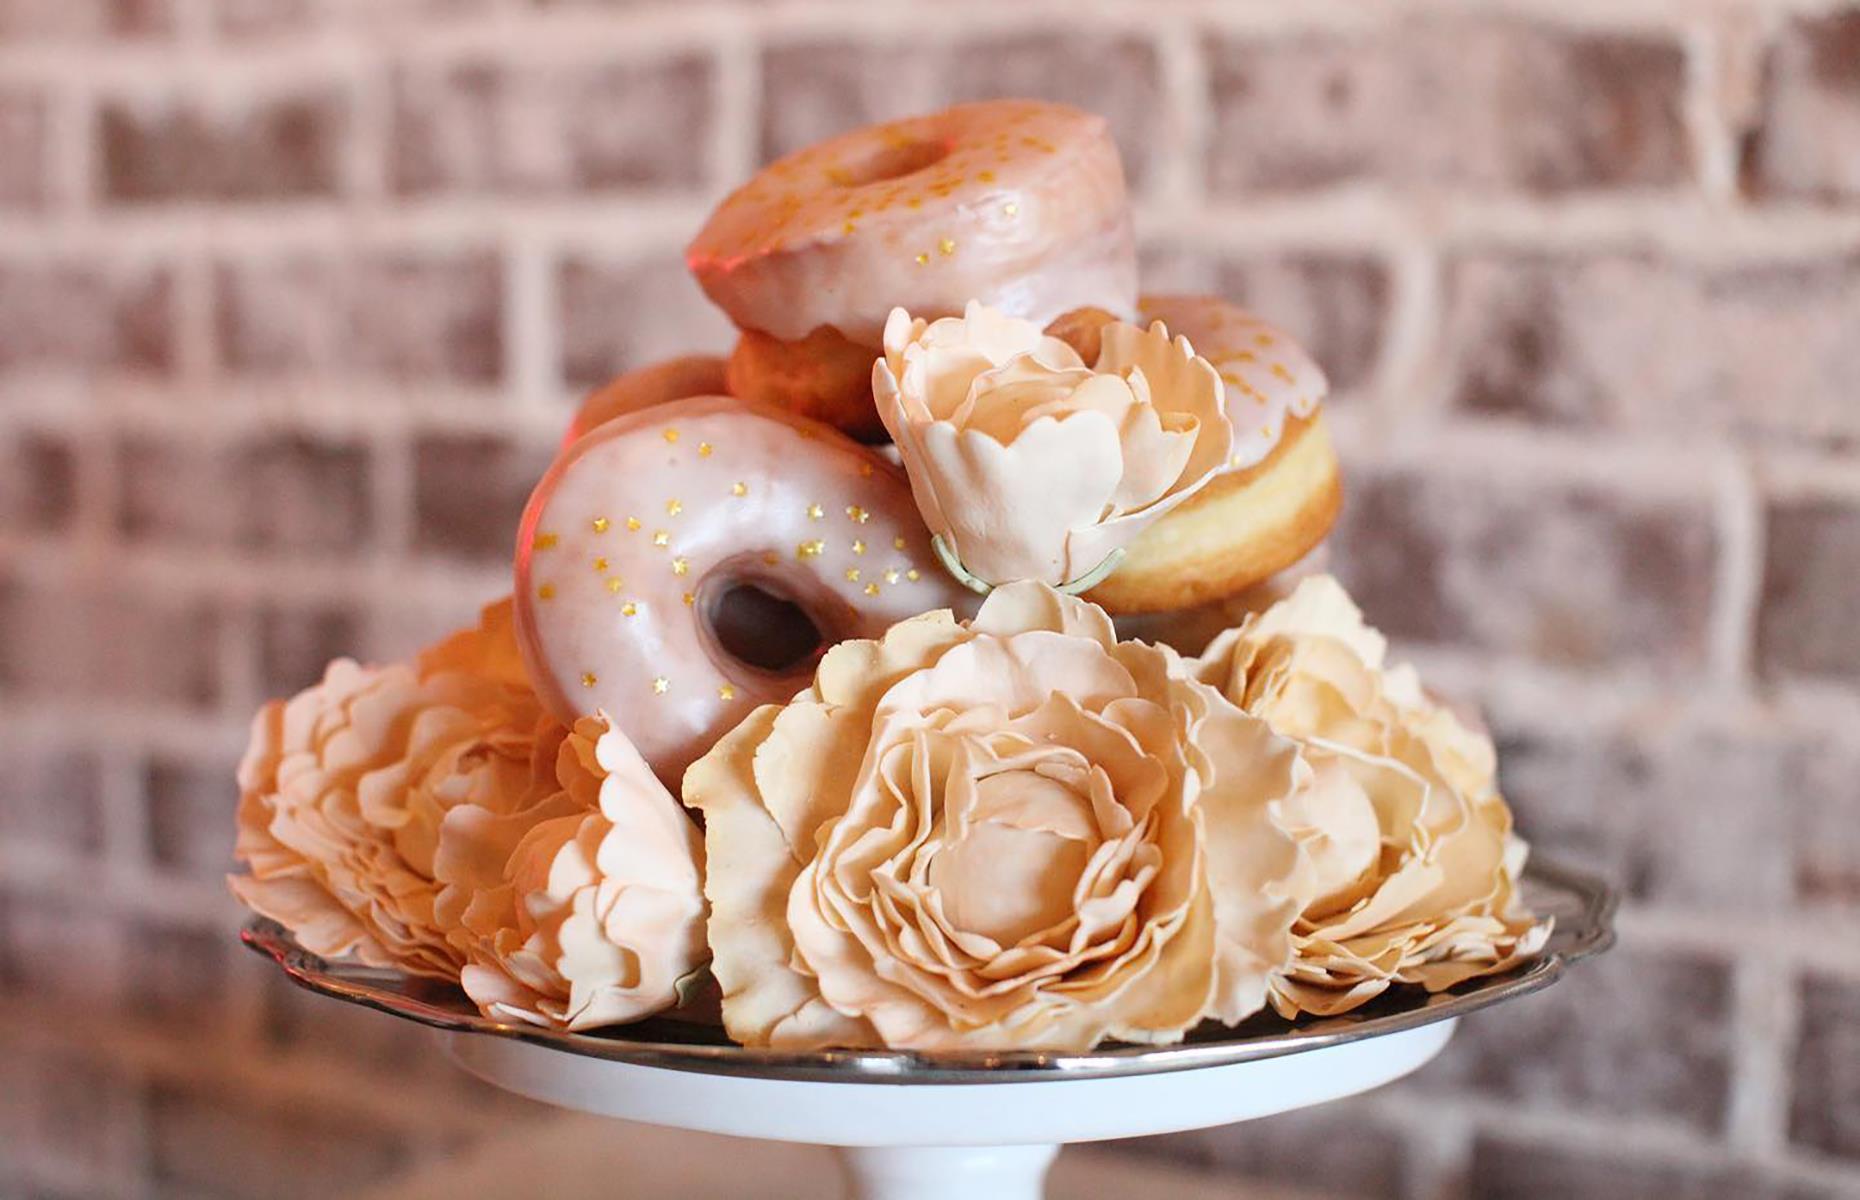 <p>These Champagne and Rosé donuts from <a href="https://www.eastparkdonutsandcoffee.com/">East Park Donuts & Coffee</a> are strictly an adults-only treat. Covered in a pale pink, alcoholic glaze with little gold stars, they’re available as a special order and perfect for weddings, birthdays and other occasions. The shop also offers 'Donut Grams' – personalized messages spelled out in donuts.</p>  <p><a href="https://www.lovefood.com/galleries/89269/the-best-independent-bakery-in-every-state?page=1"><strong>This is the best independent bakery in your state</strong></a></p>